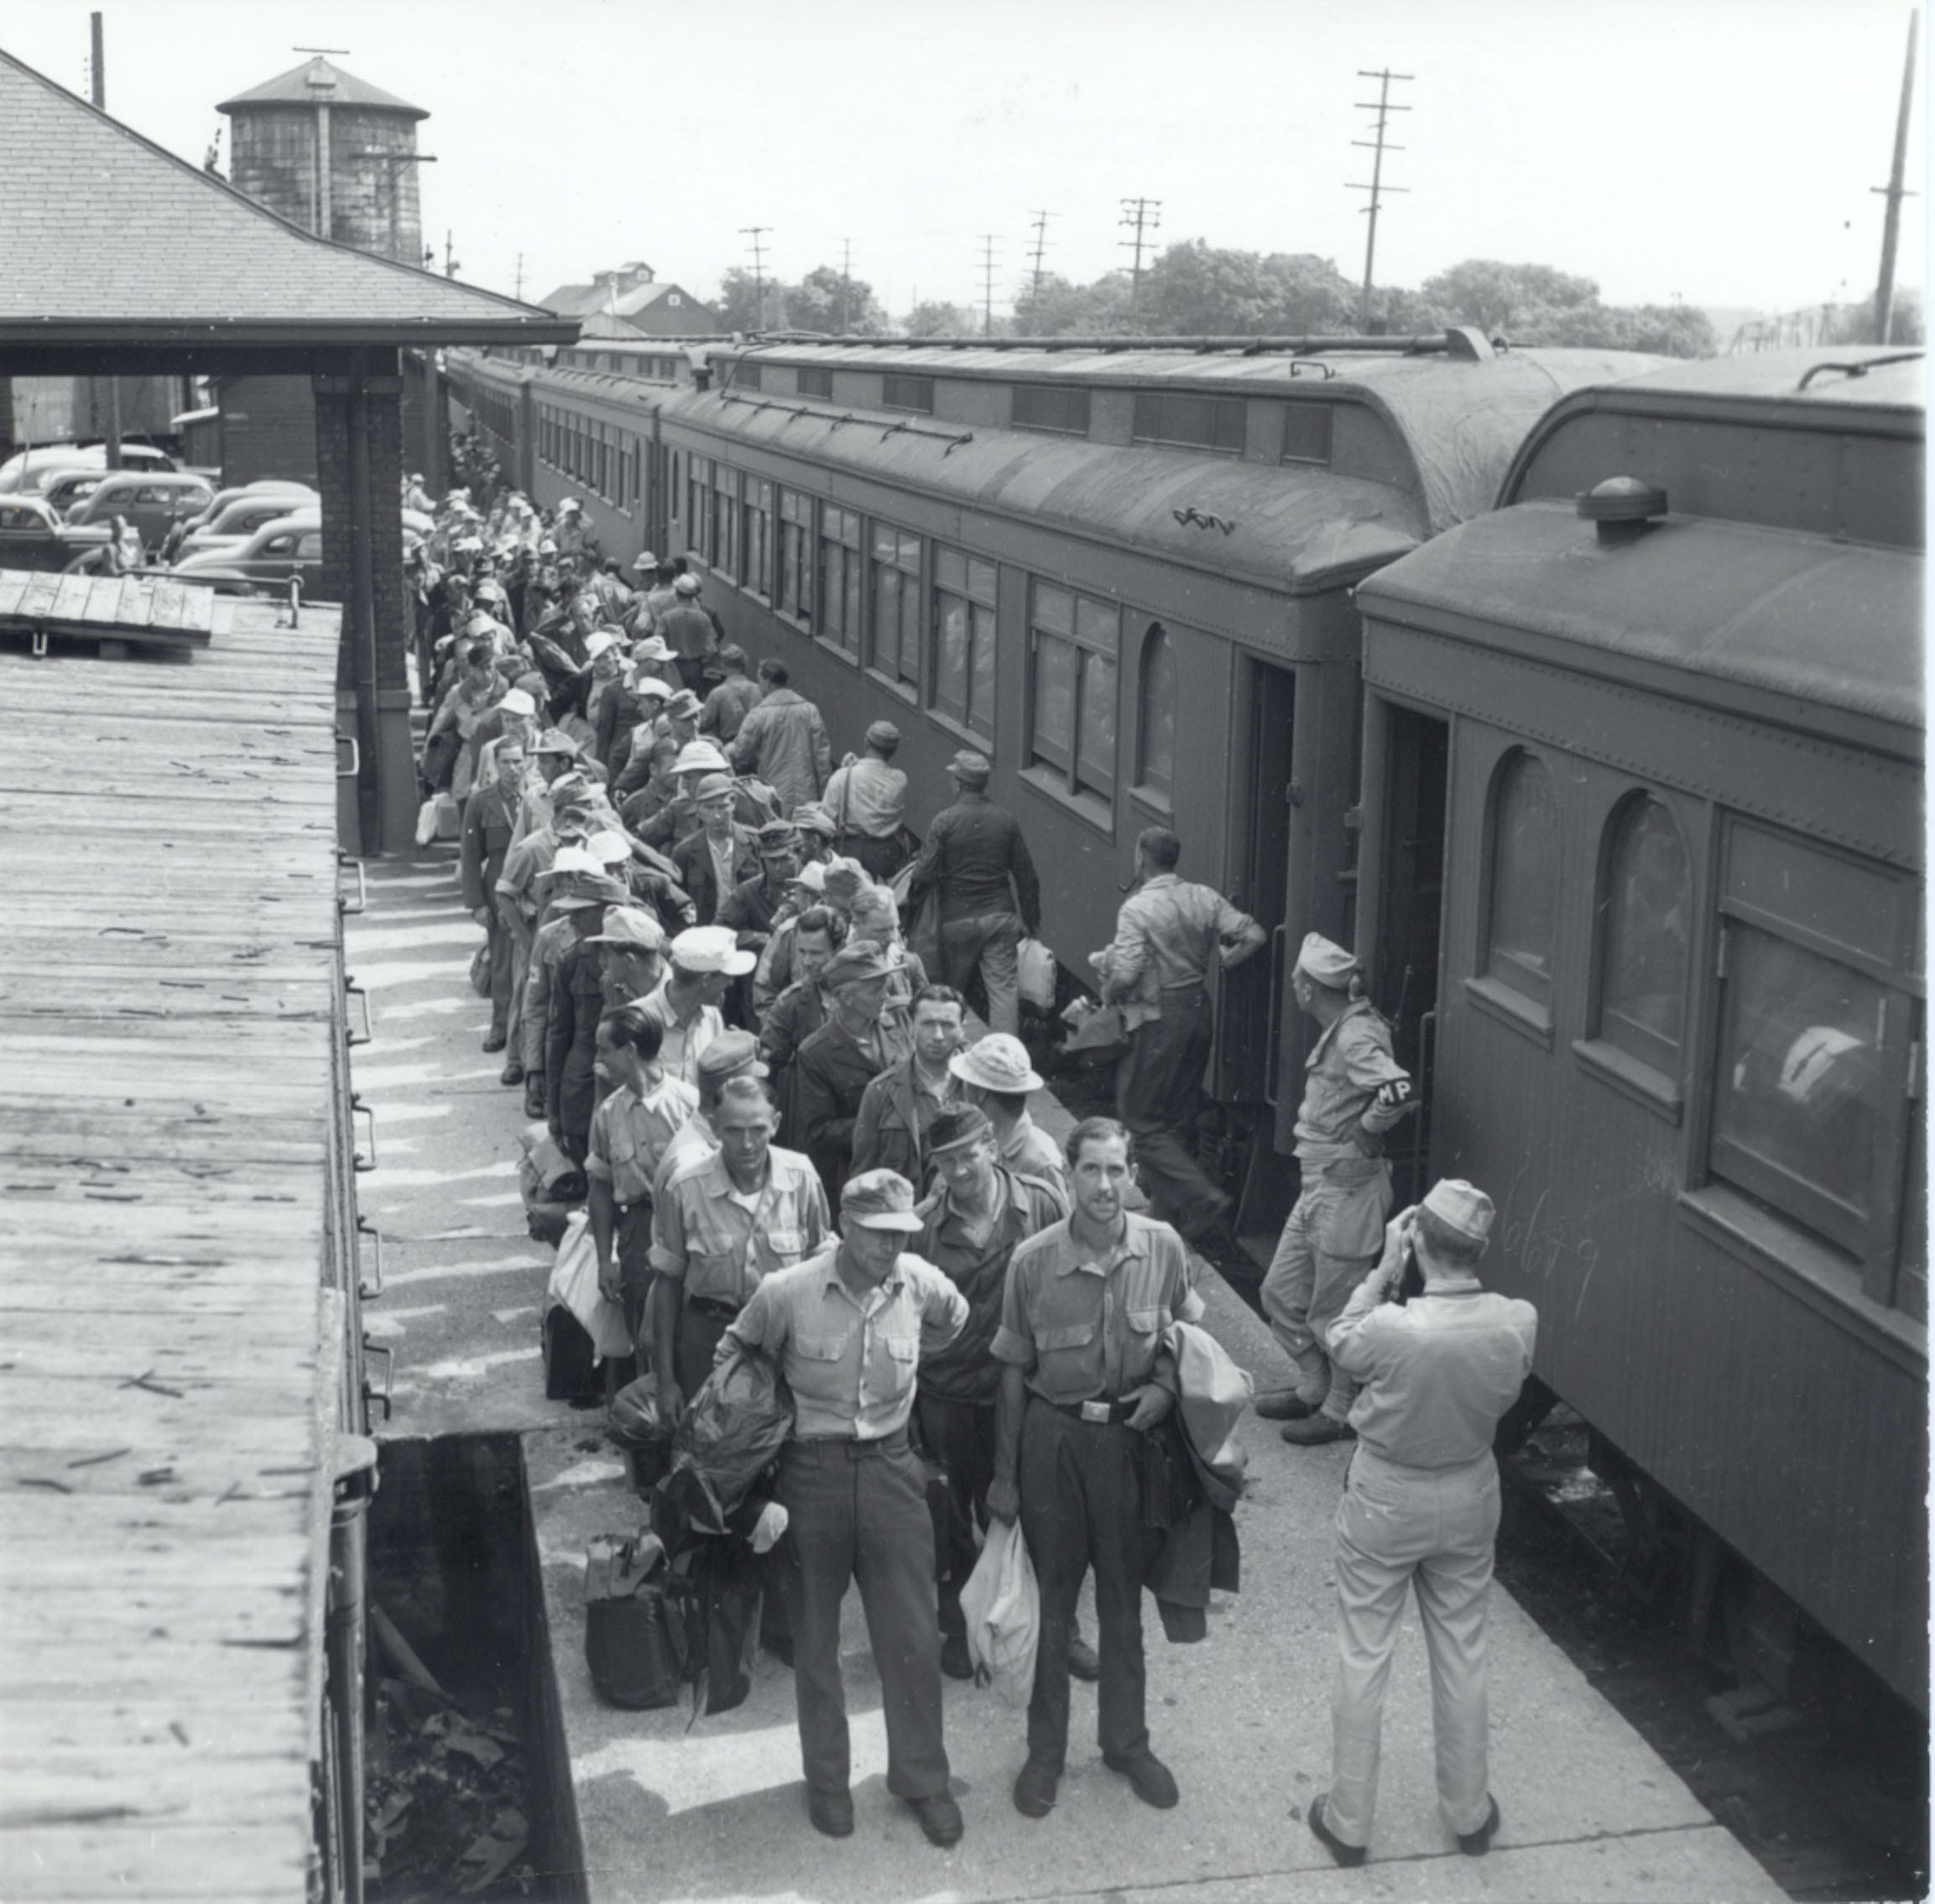 German POWs arrive by train to work in Door County orchards and canneries during World War II.